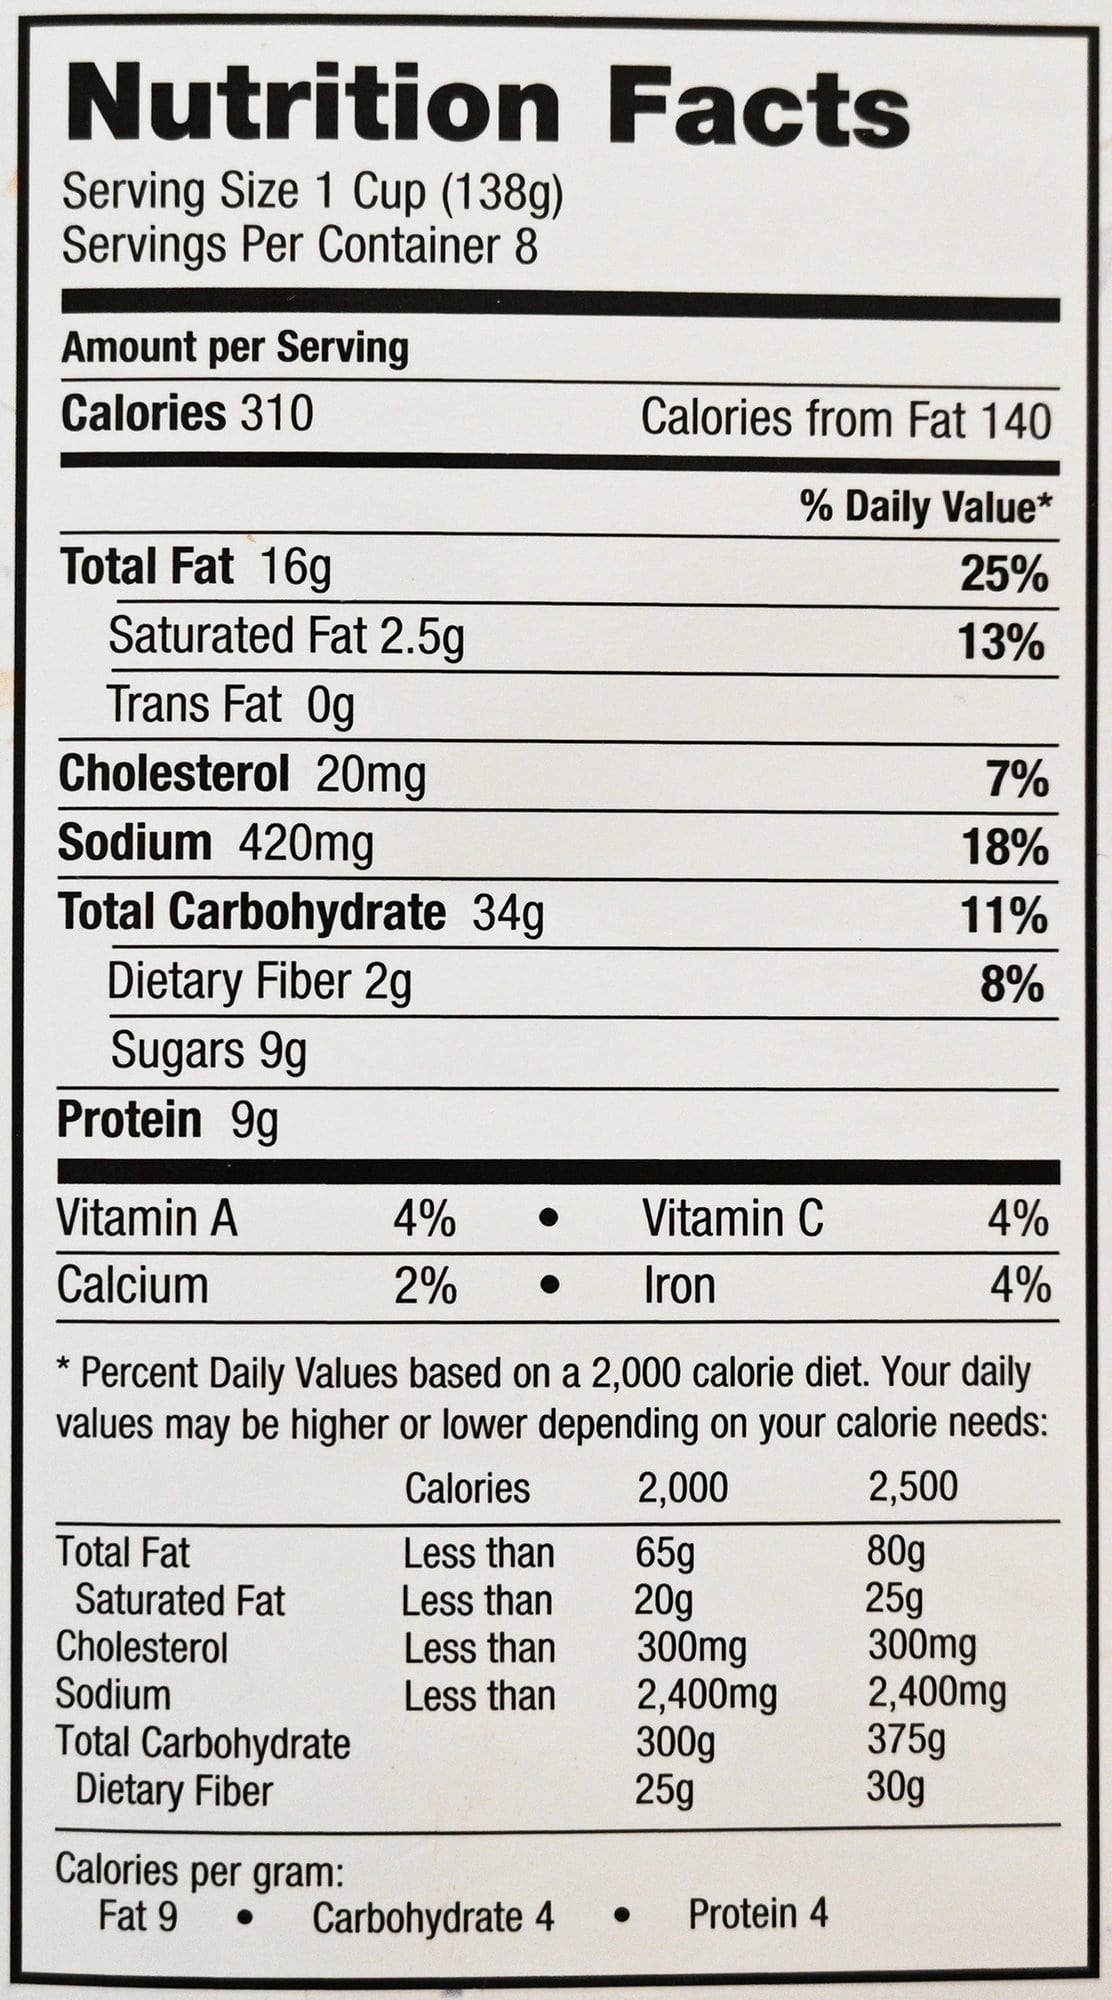 Image of the nutrition facts for the stuffing from the back of the box.